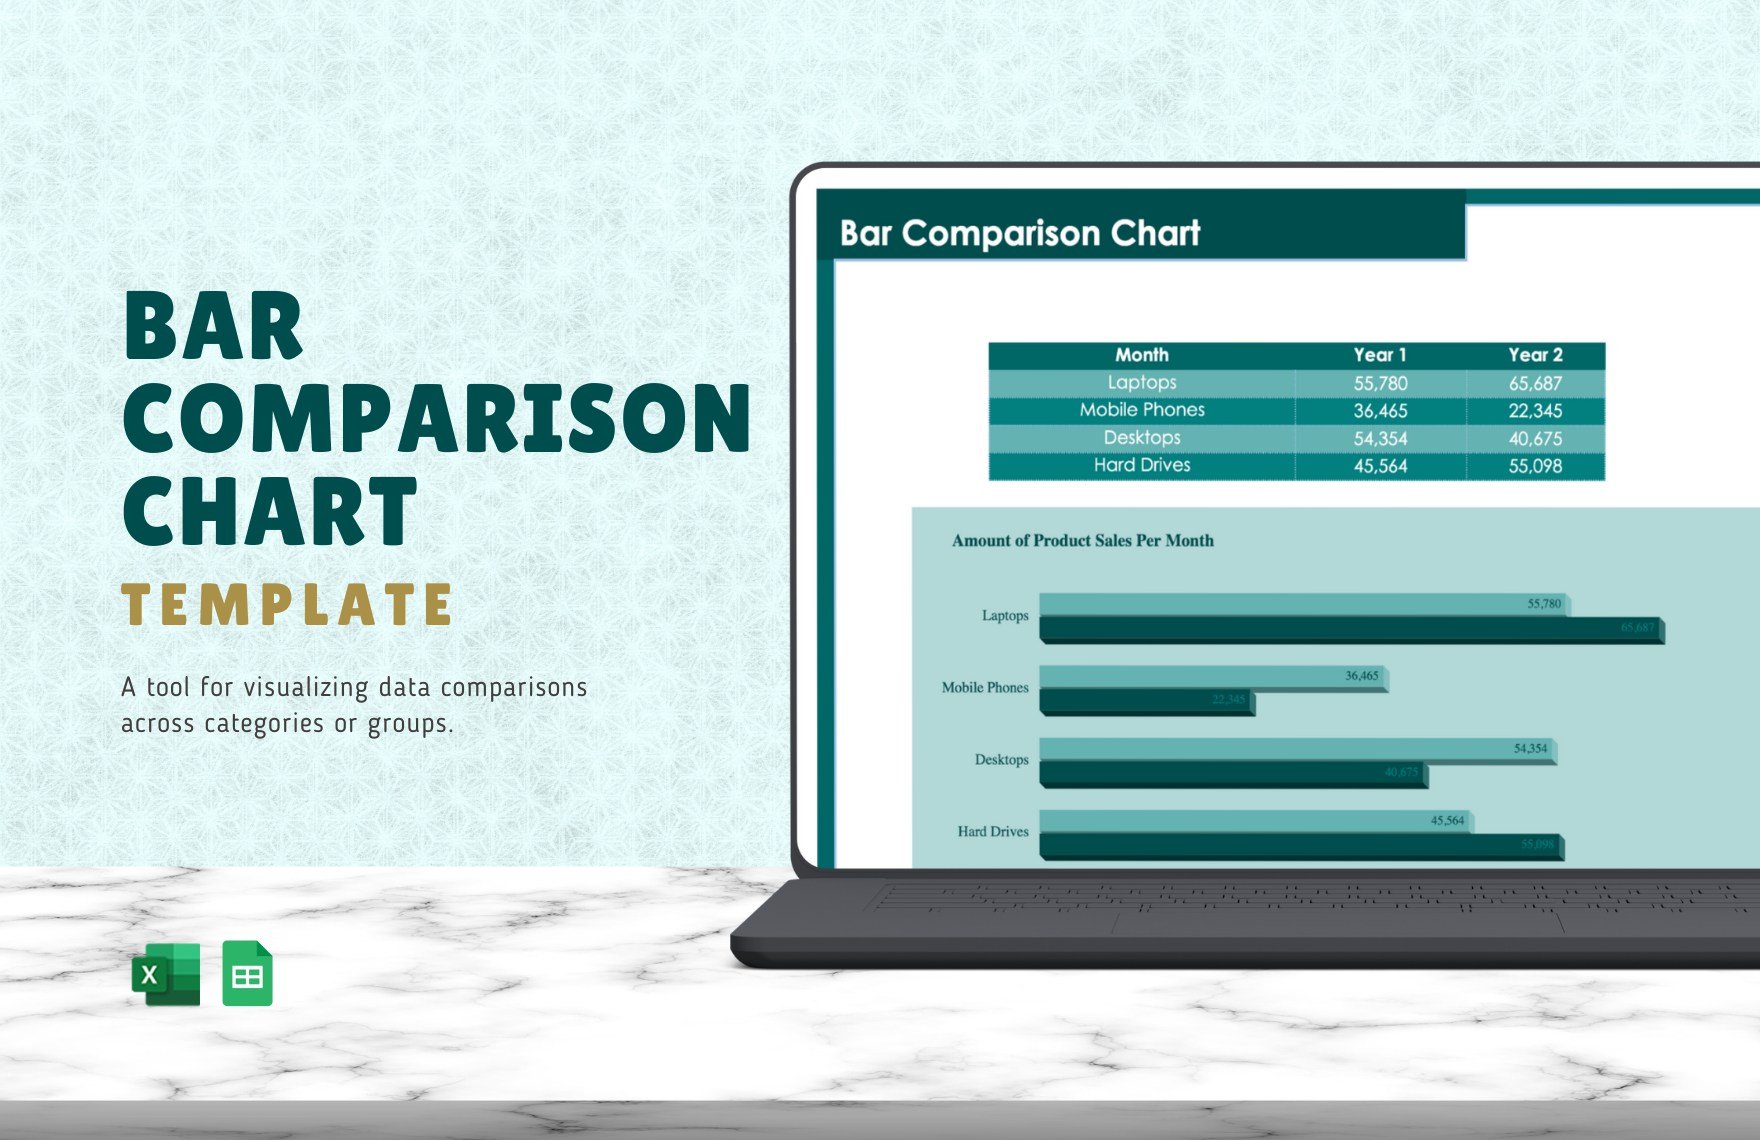 Bar Comparison Chart Template in Excel, Google Sheets